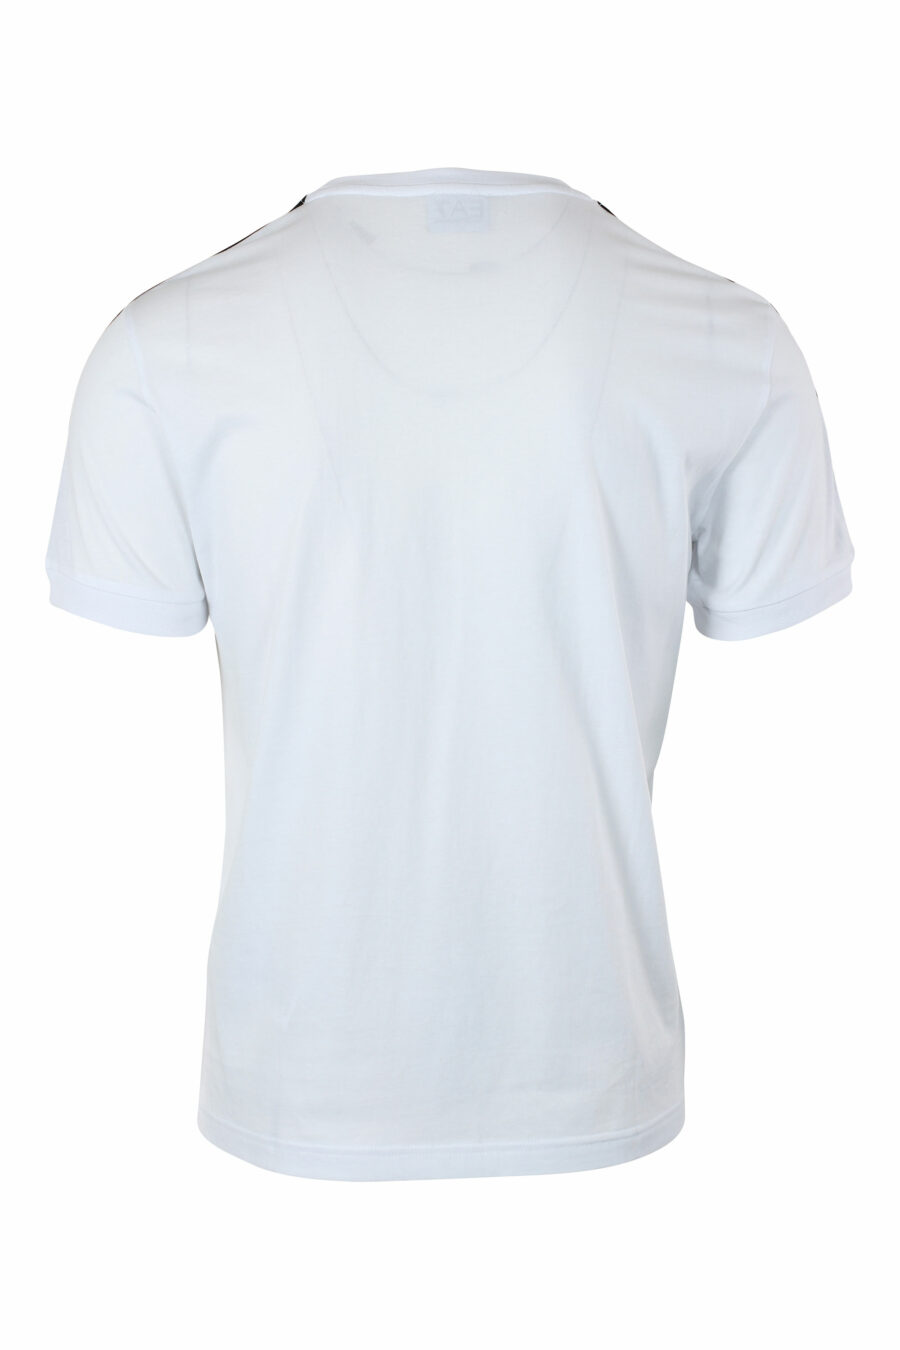 White T-shirt with logo tape on shoulder and black minilogue - IMG 9640